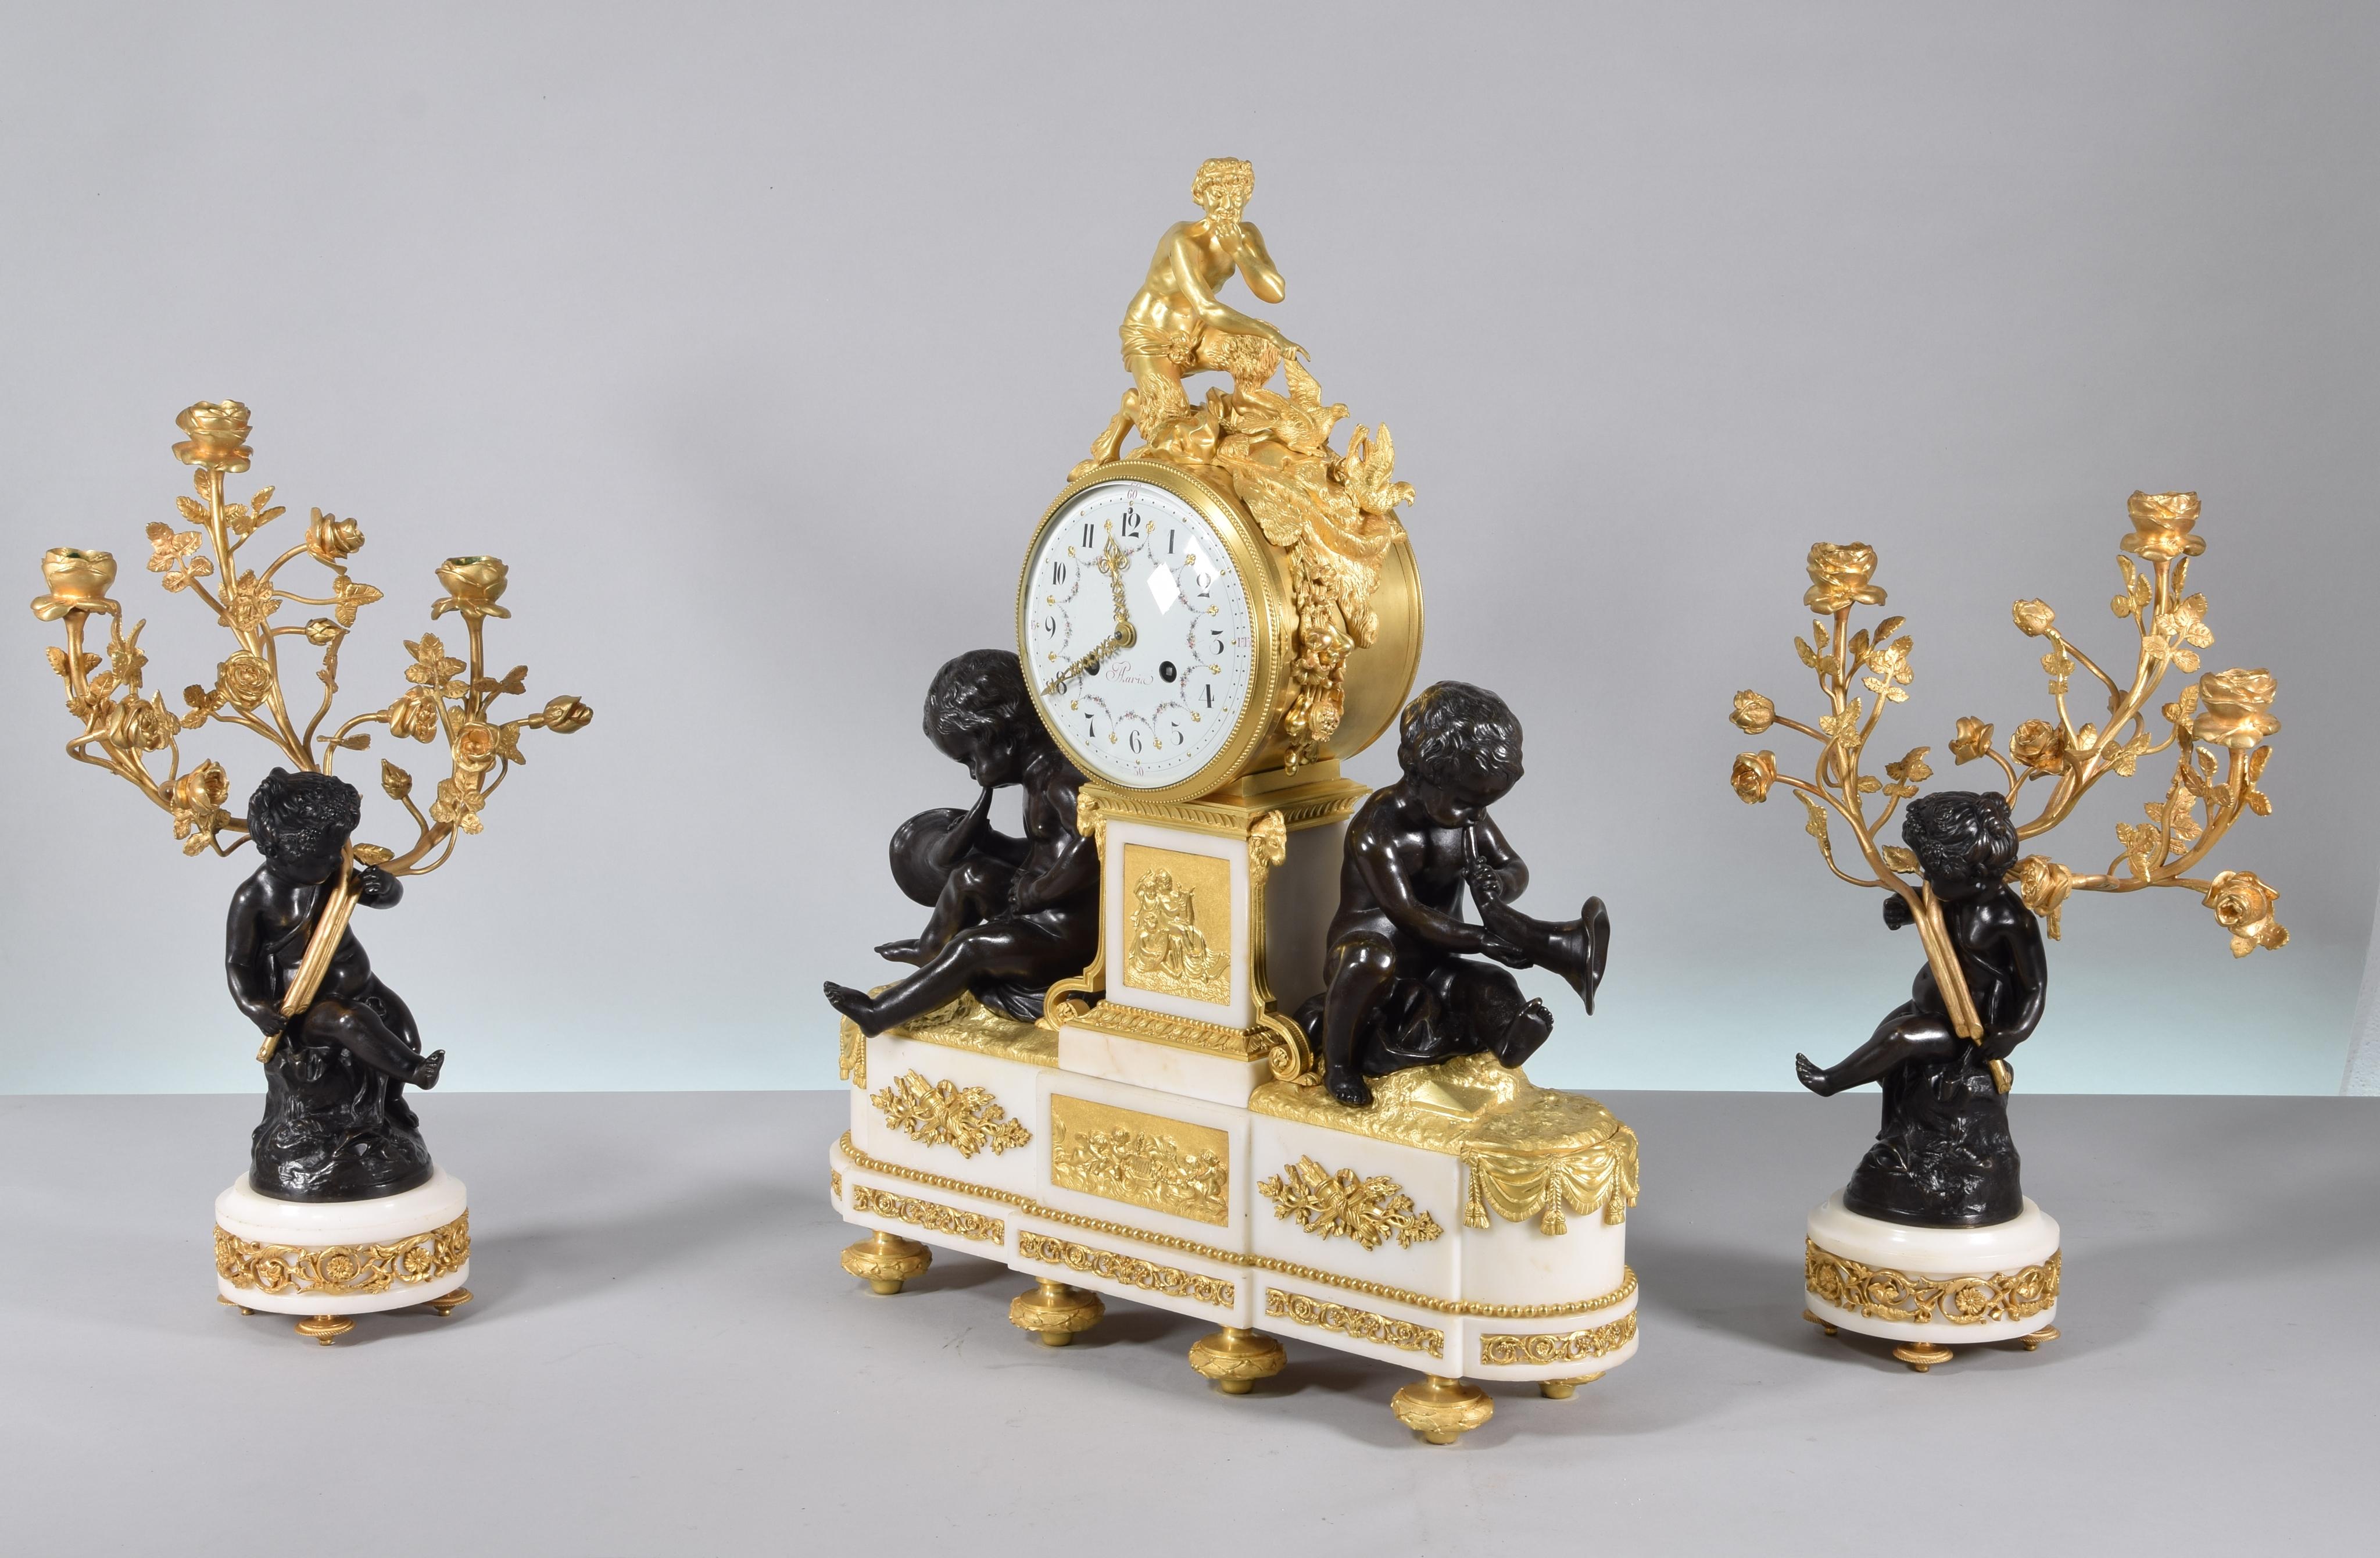 Clock and candelabra trim. Blued and gilded bronze, marble. Raingo Frères, Aaria, Clodion. Paris, France, second half of the 19th century. 
Working. 
The two candelabras follow a model highly appreciated in the 19th century of a bronze figure of a